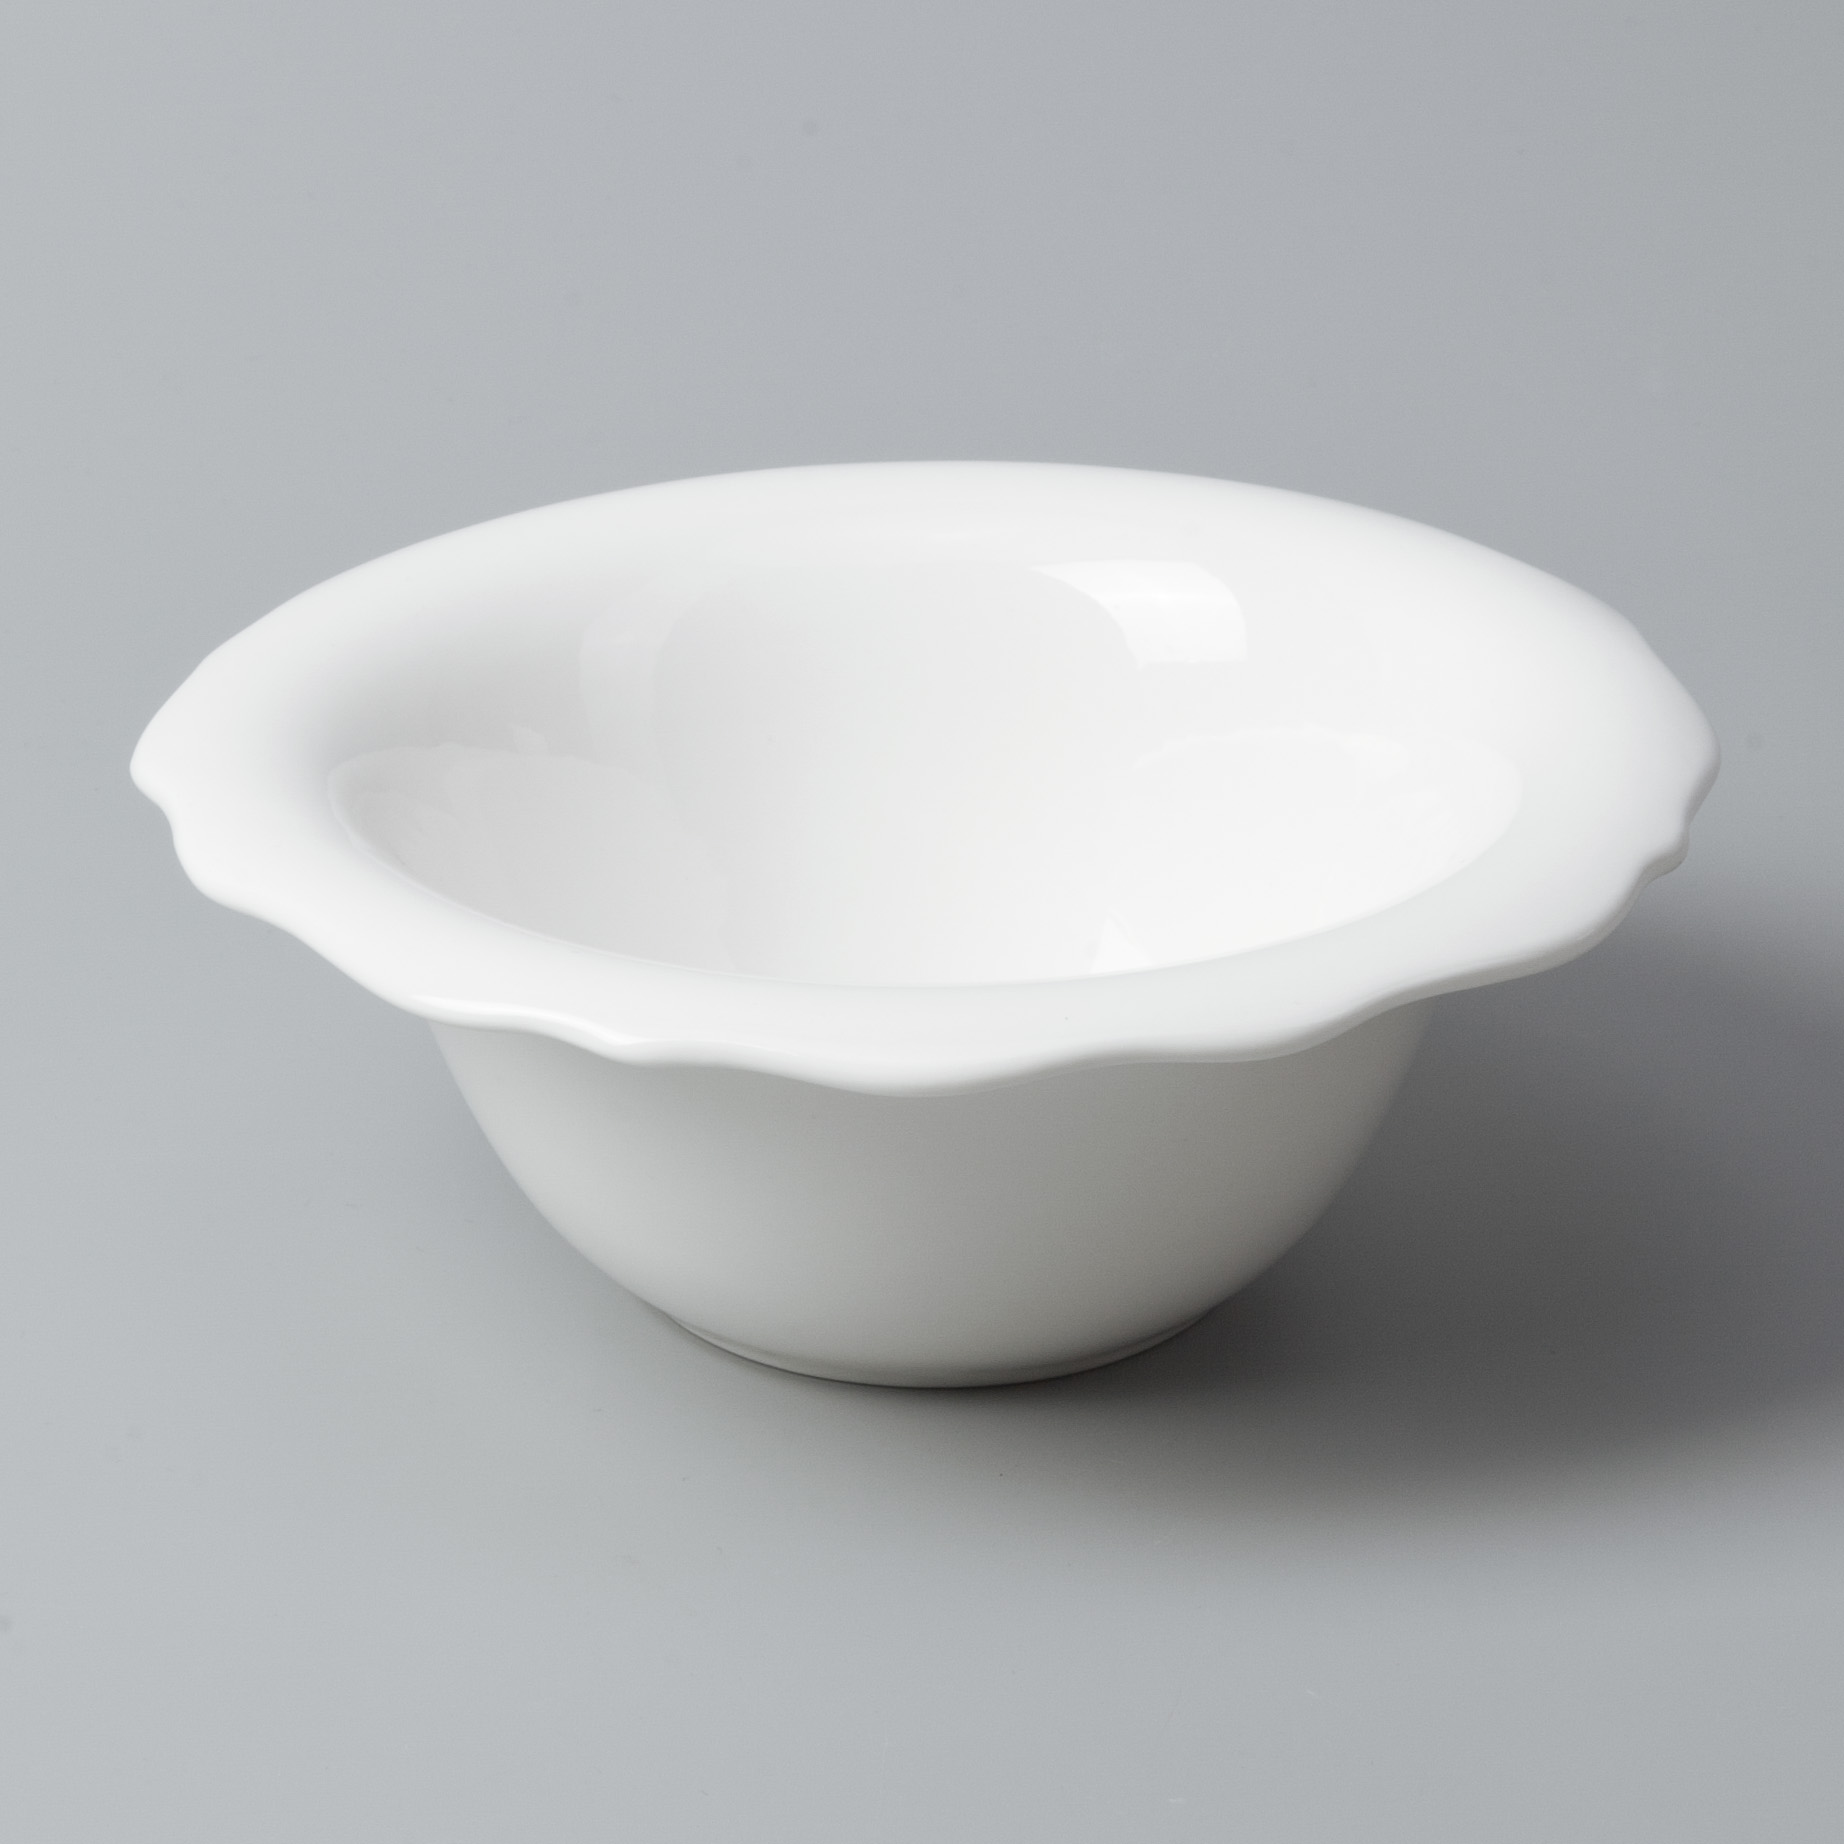 Two Eight sample white dinnerware sets for 8 series for home-5